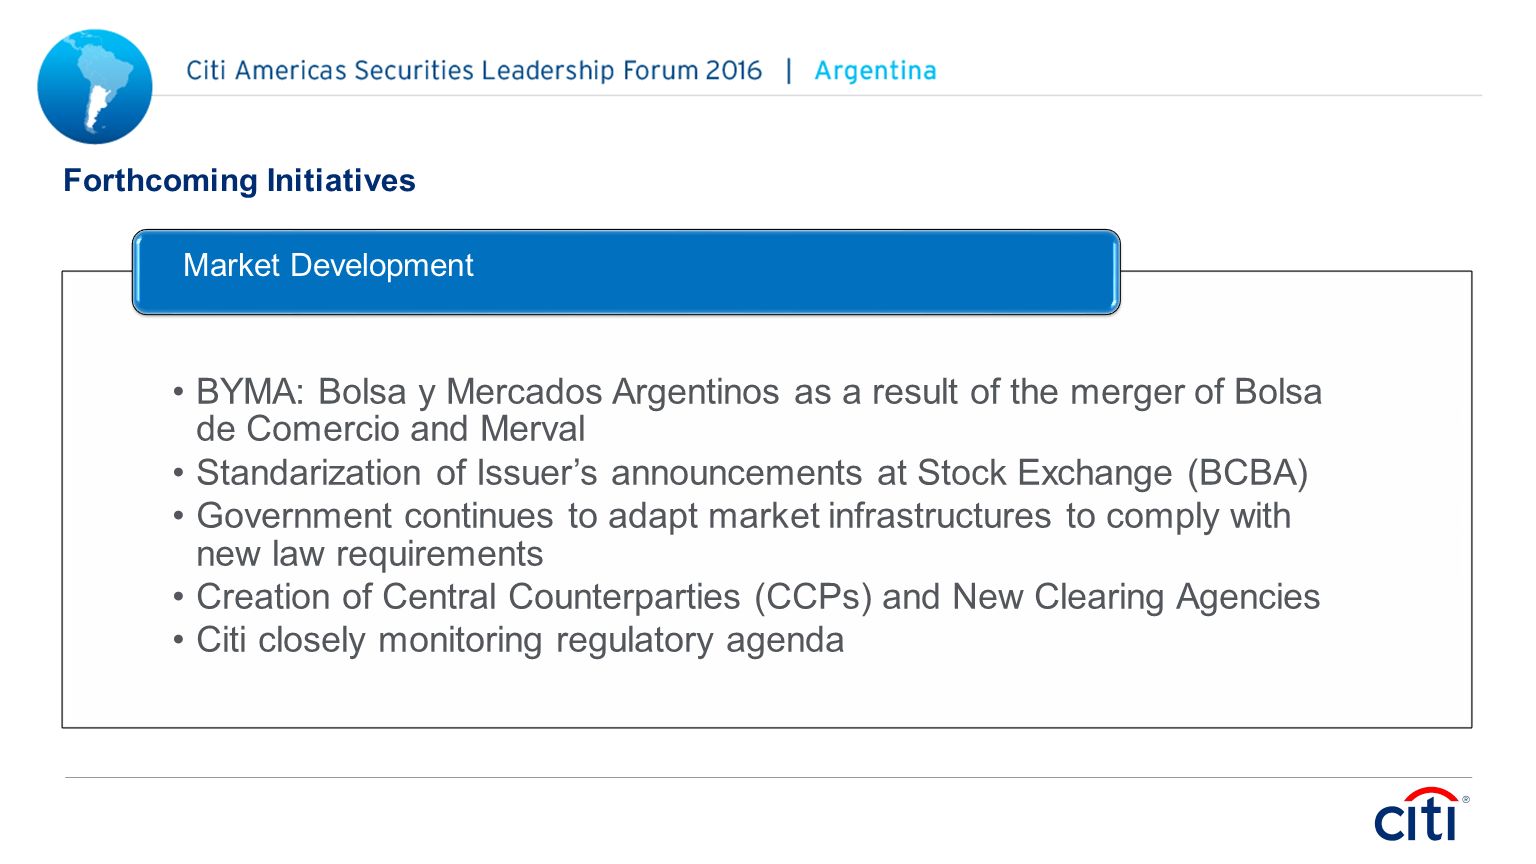 Forthcoming Initiatives BYMA: Bolsa y Mercados Argentinos as a result of the merger of Bolsa de Comercio and Merval Standarization of Issuer’s announcements at Stock Exchange (BCBA) Government continues to adapt market infrastructures to comply with new law requirements Creation of Central Counterparties (CCPs) and New Clearing Agencies Citi closely monitoring regulatory agenda Market Development